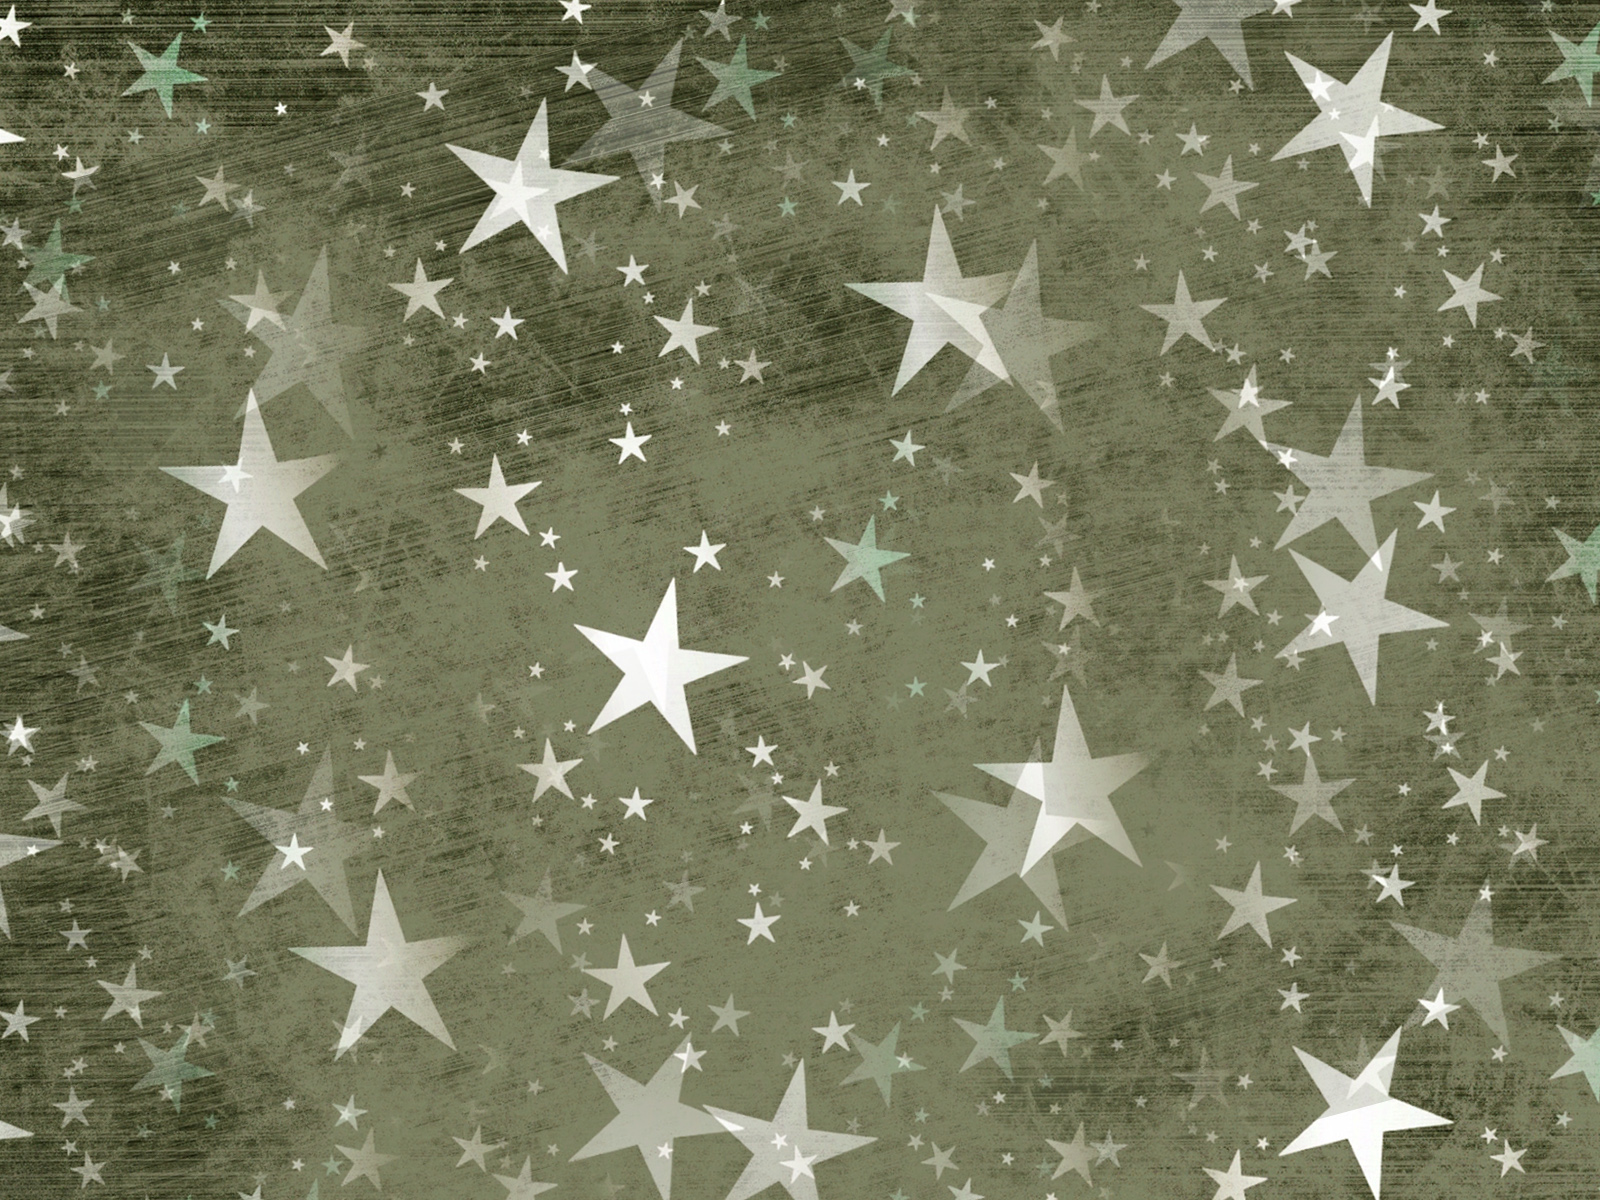 Grunge background with Stars Texture backgrounds